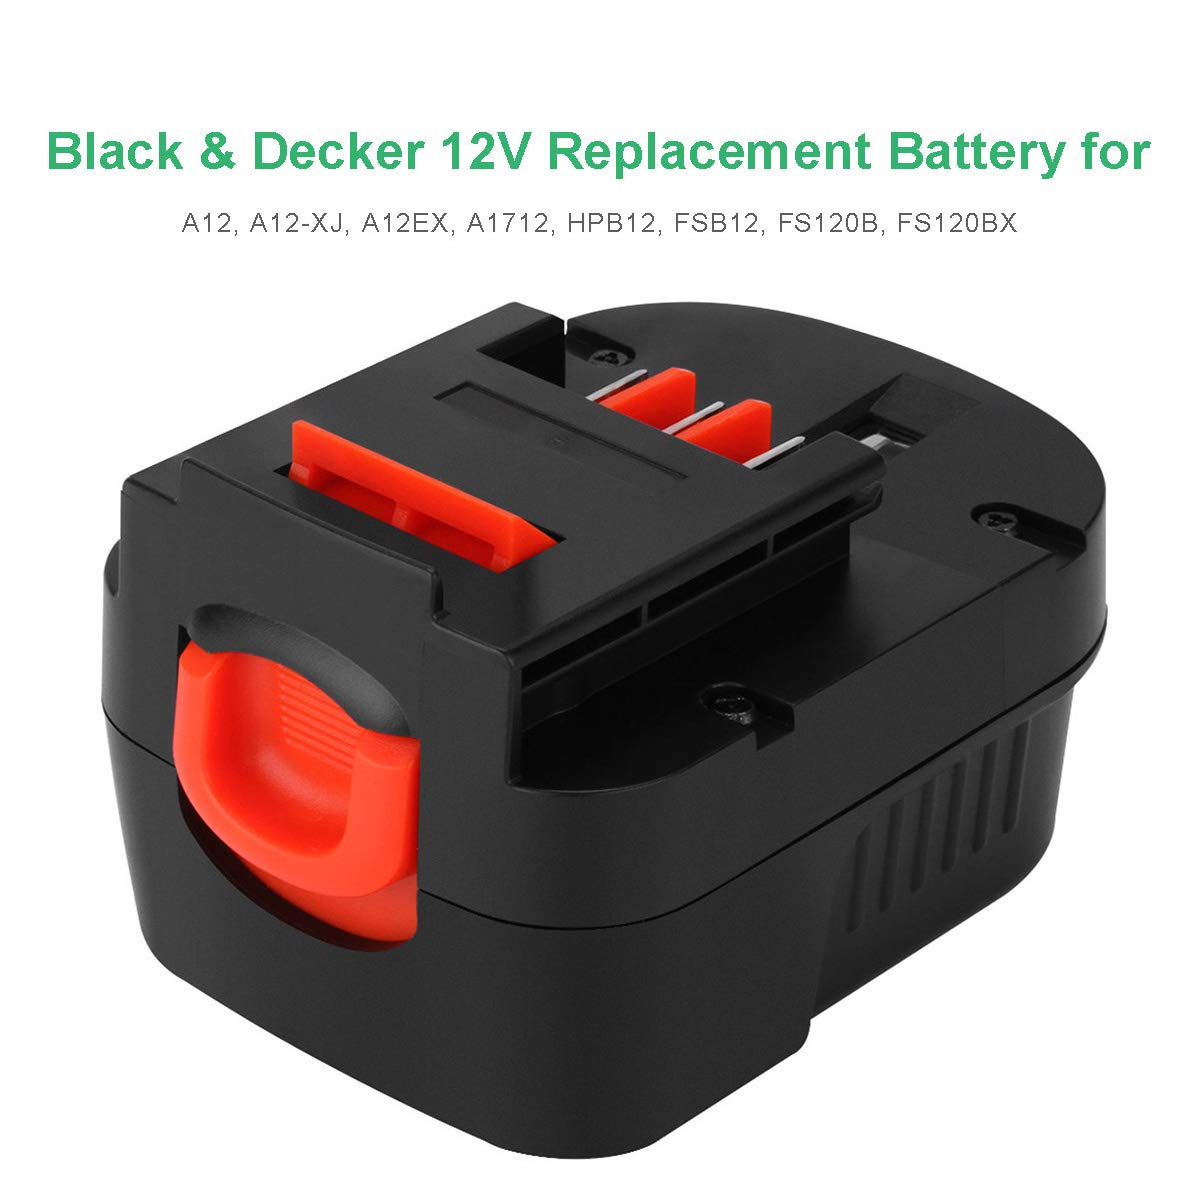 2 Pack Upgraded 12V 4800mAh Replacement for Black and Decker HBP12 NI-MH Battery | A1712 FS120B FSB12 HPB12 A12 A12-XJ A12EX FS120B FSB12 FS120BX Battery